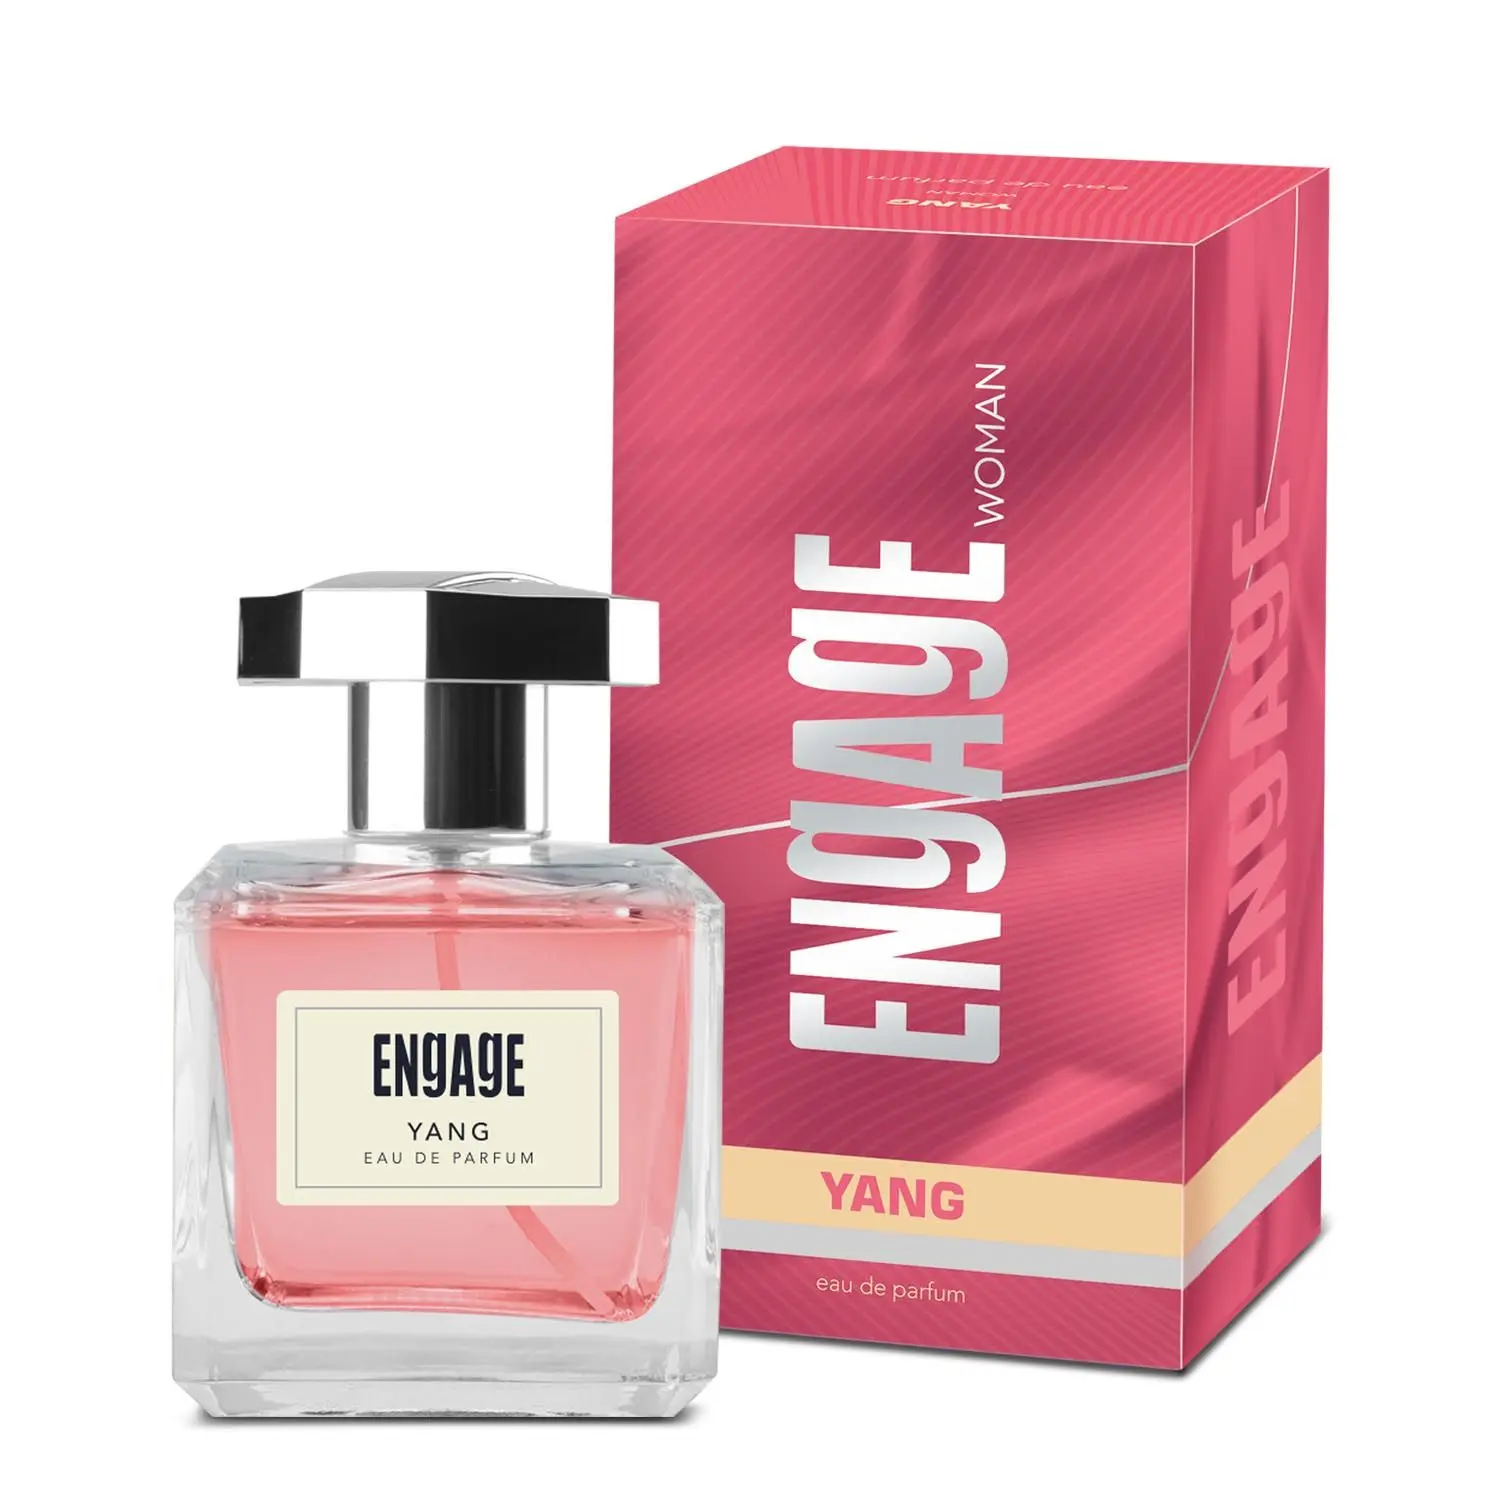 Engage Yang EDP Perfume For Women (100ml + 3ml), Floral and Fruity, Premium Long Lasting Fragrance, Perfect Gift For Women, Skin Friendly, Everyday Fragrance